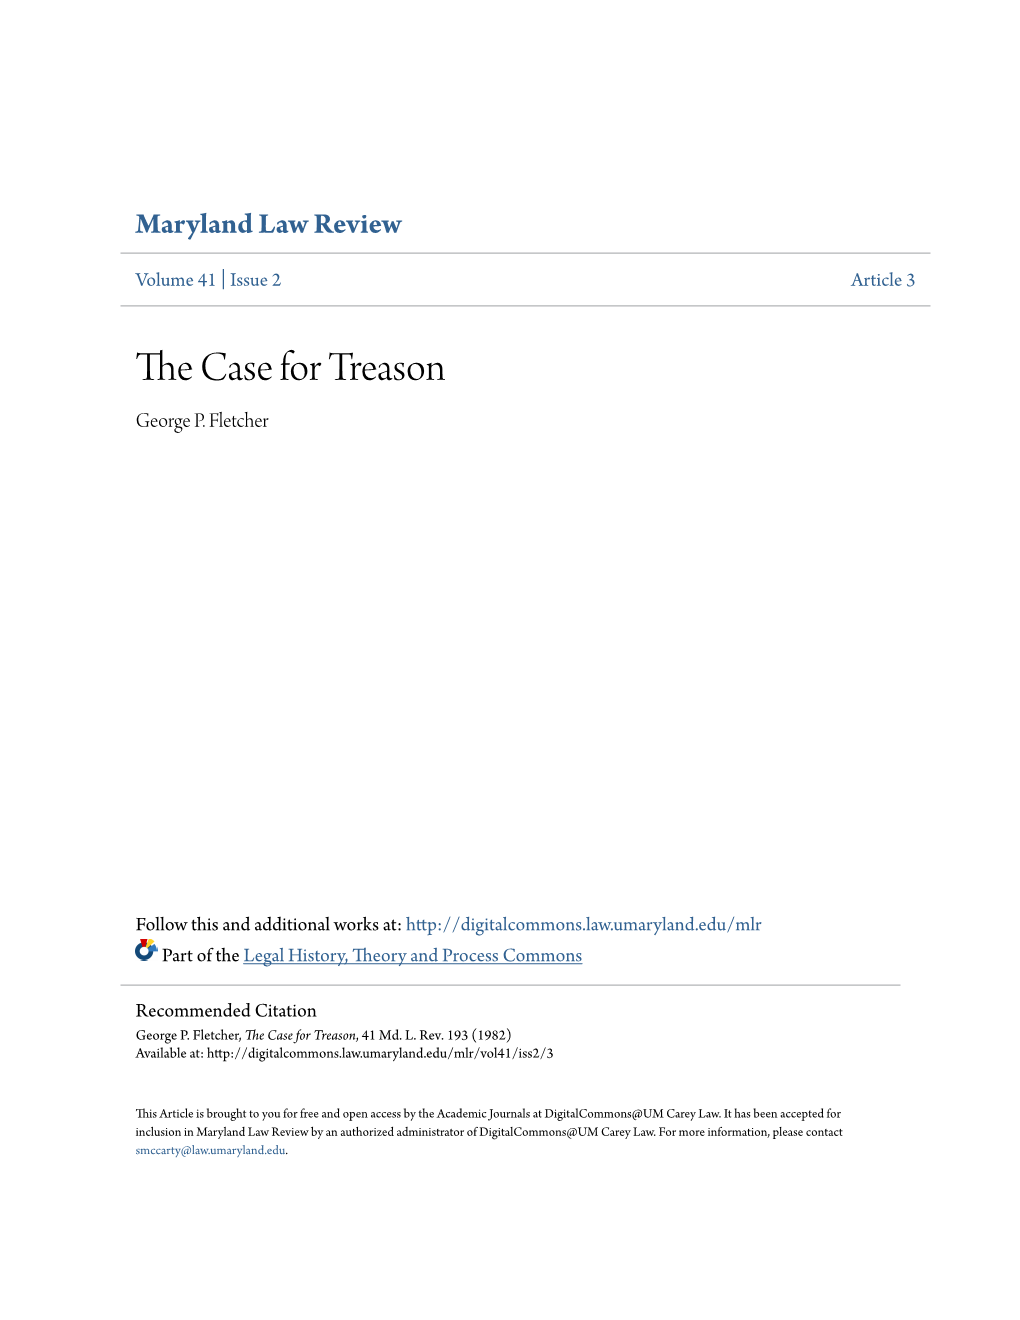 The Case for Treason, 41 Md